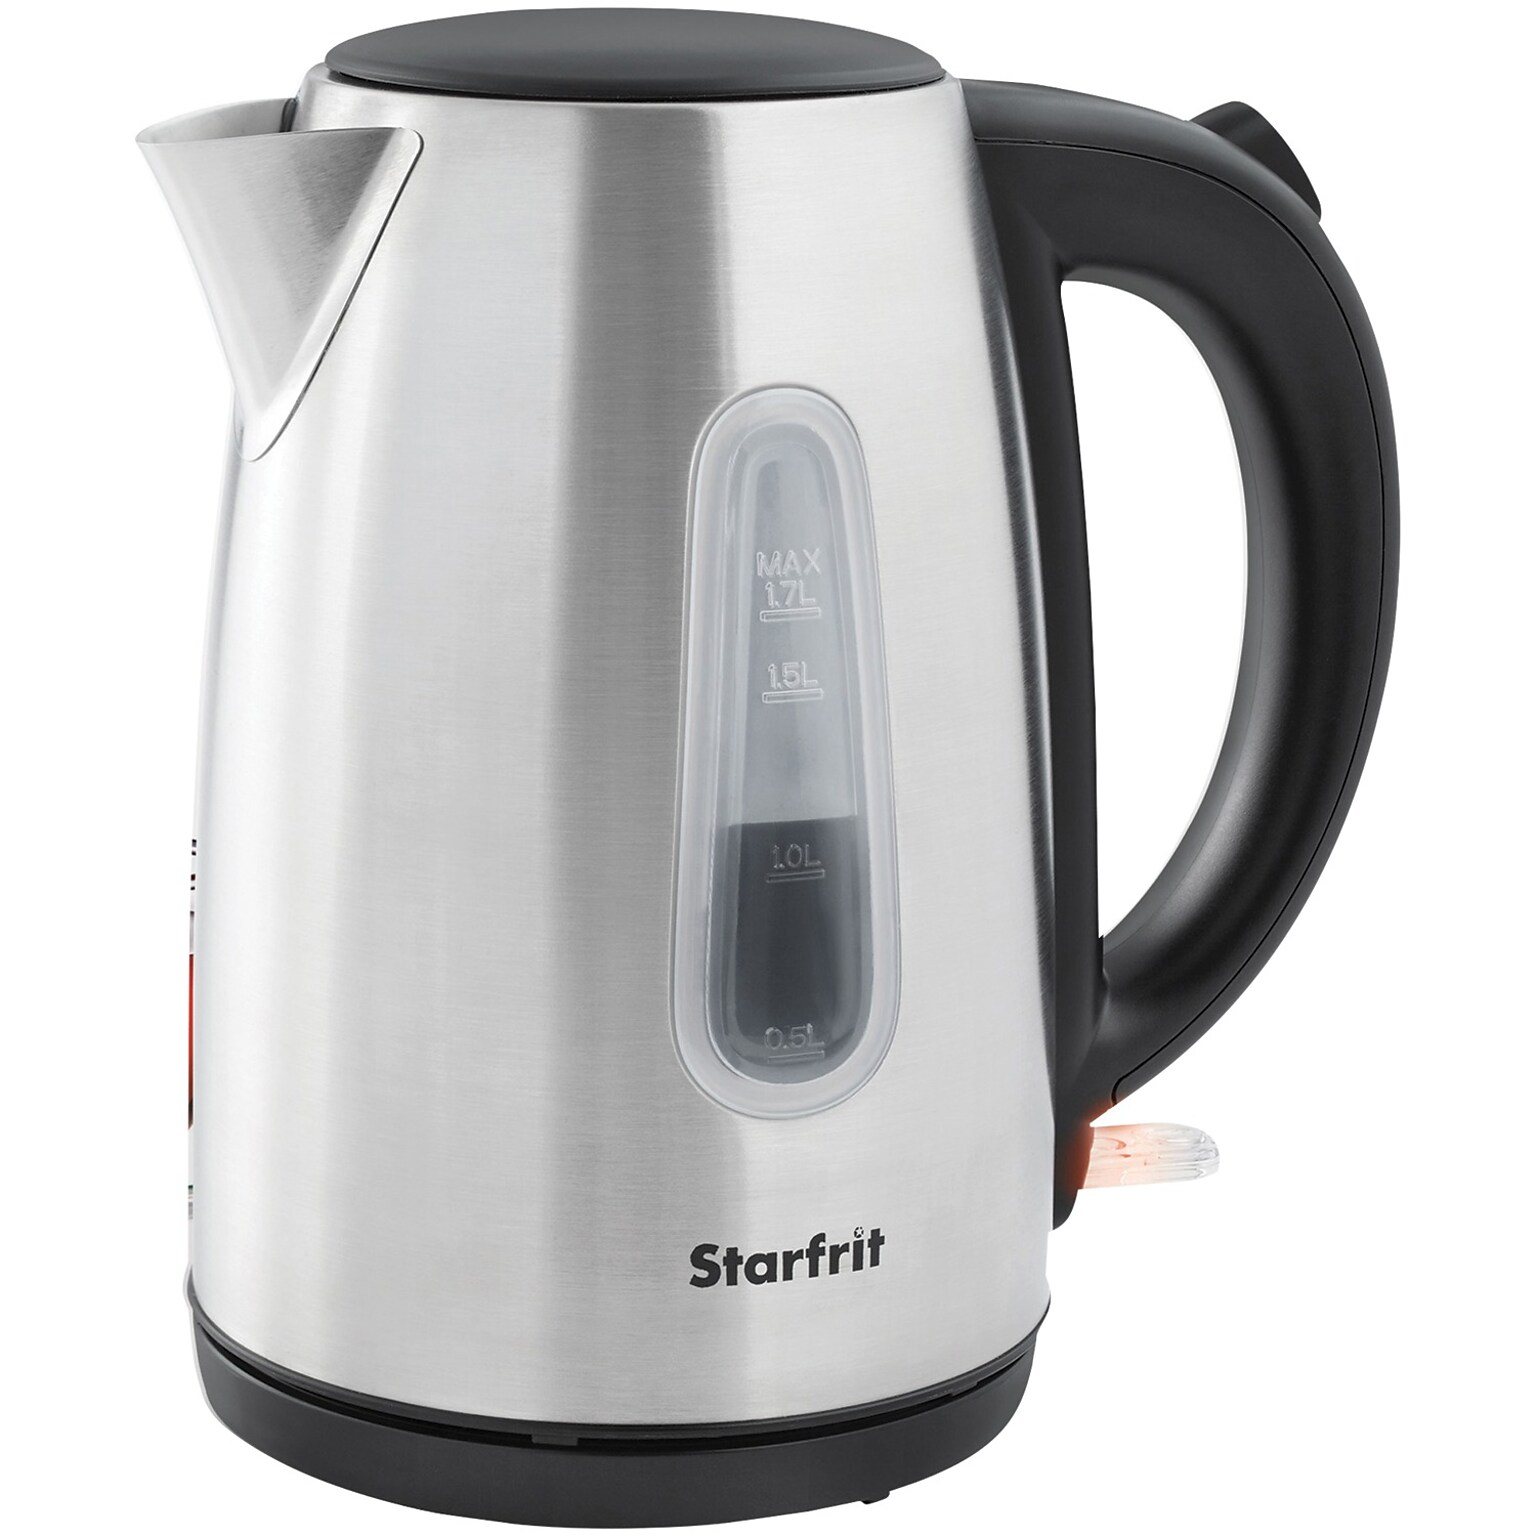 Starfrit® 1.8-Quart Stainless Steel Electric Kettle, Grey (024010-006-0000)